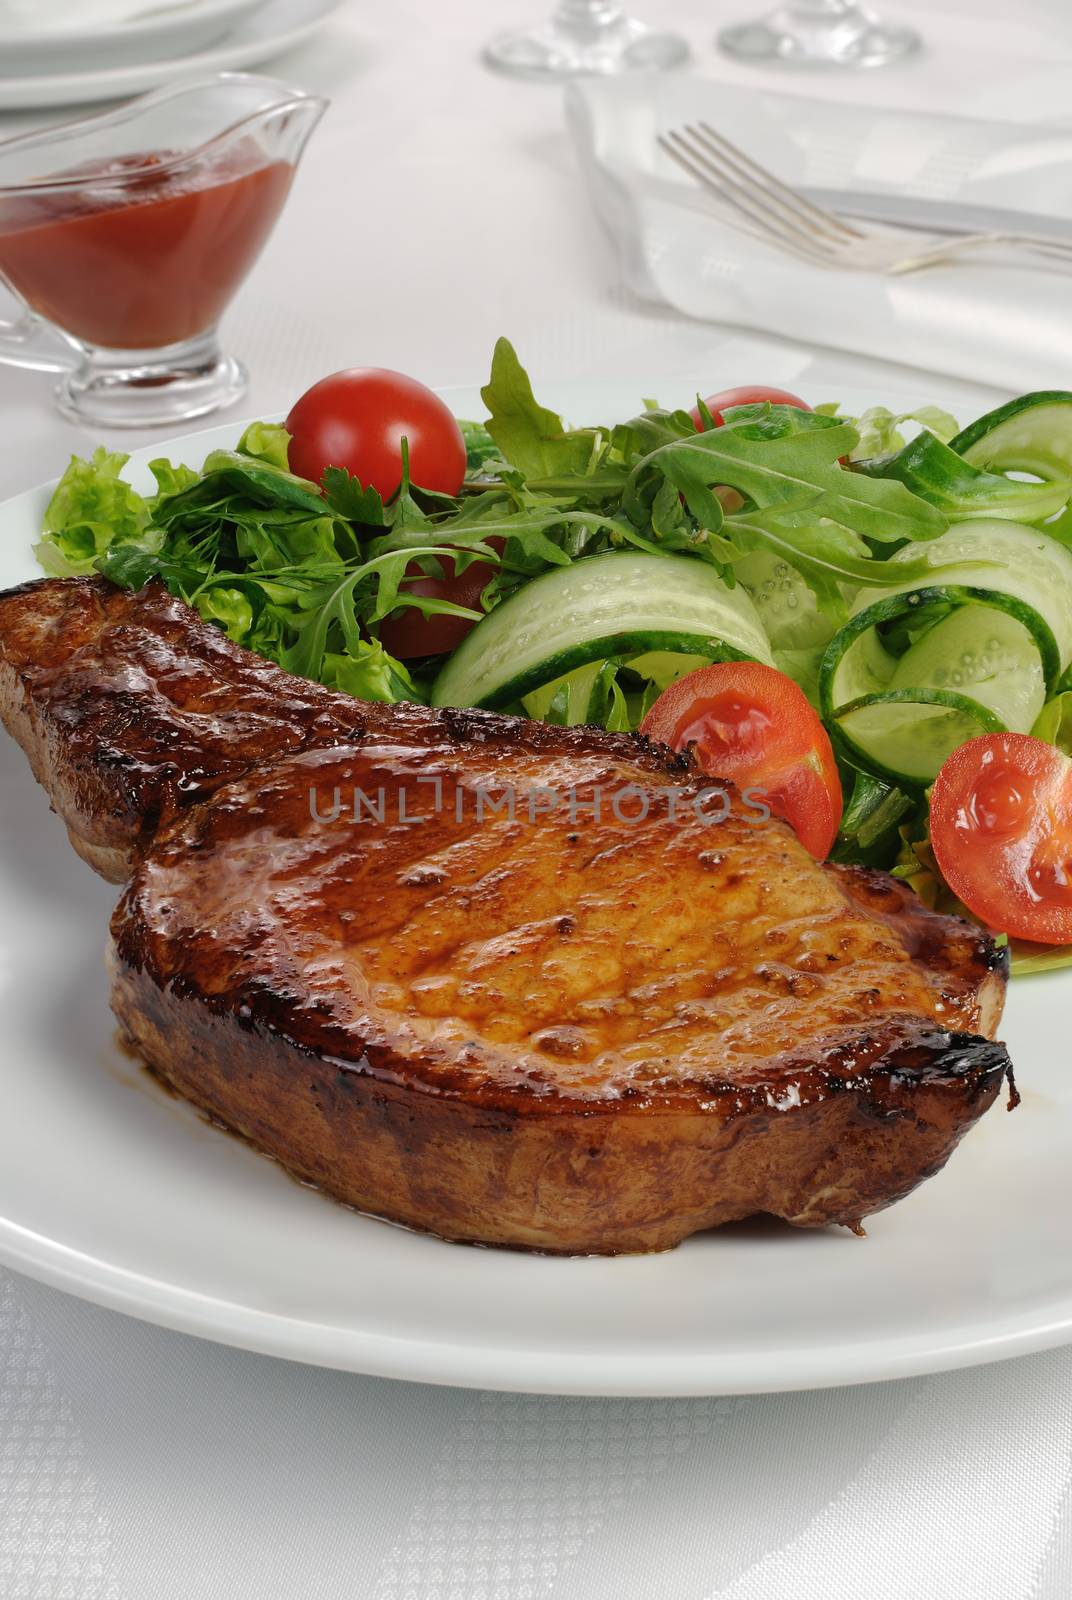 Grilled steak with vegetables on bone by Apolonia